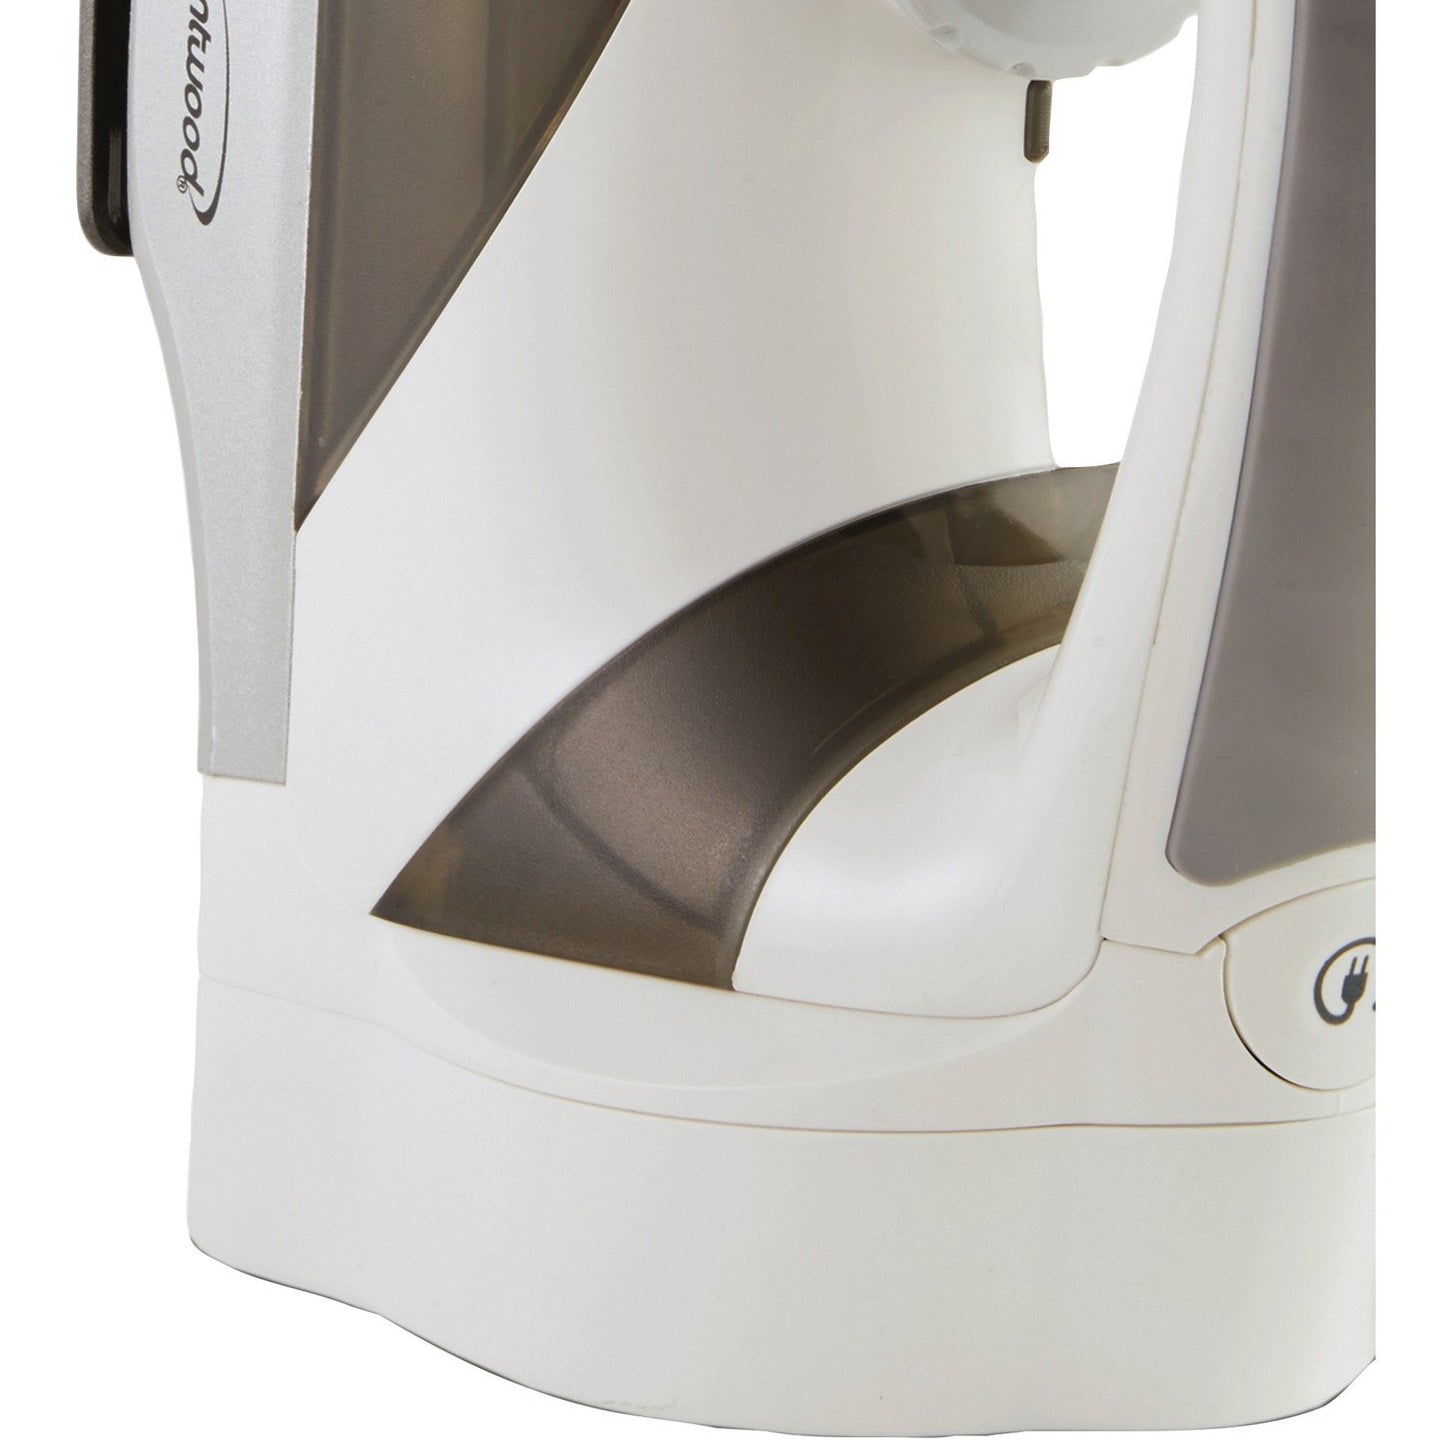 Brentwood Appl. MPI-59W Steam Iron w/Retractable Cord